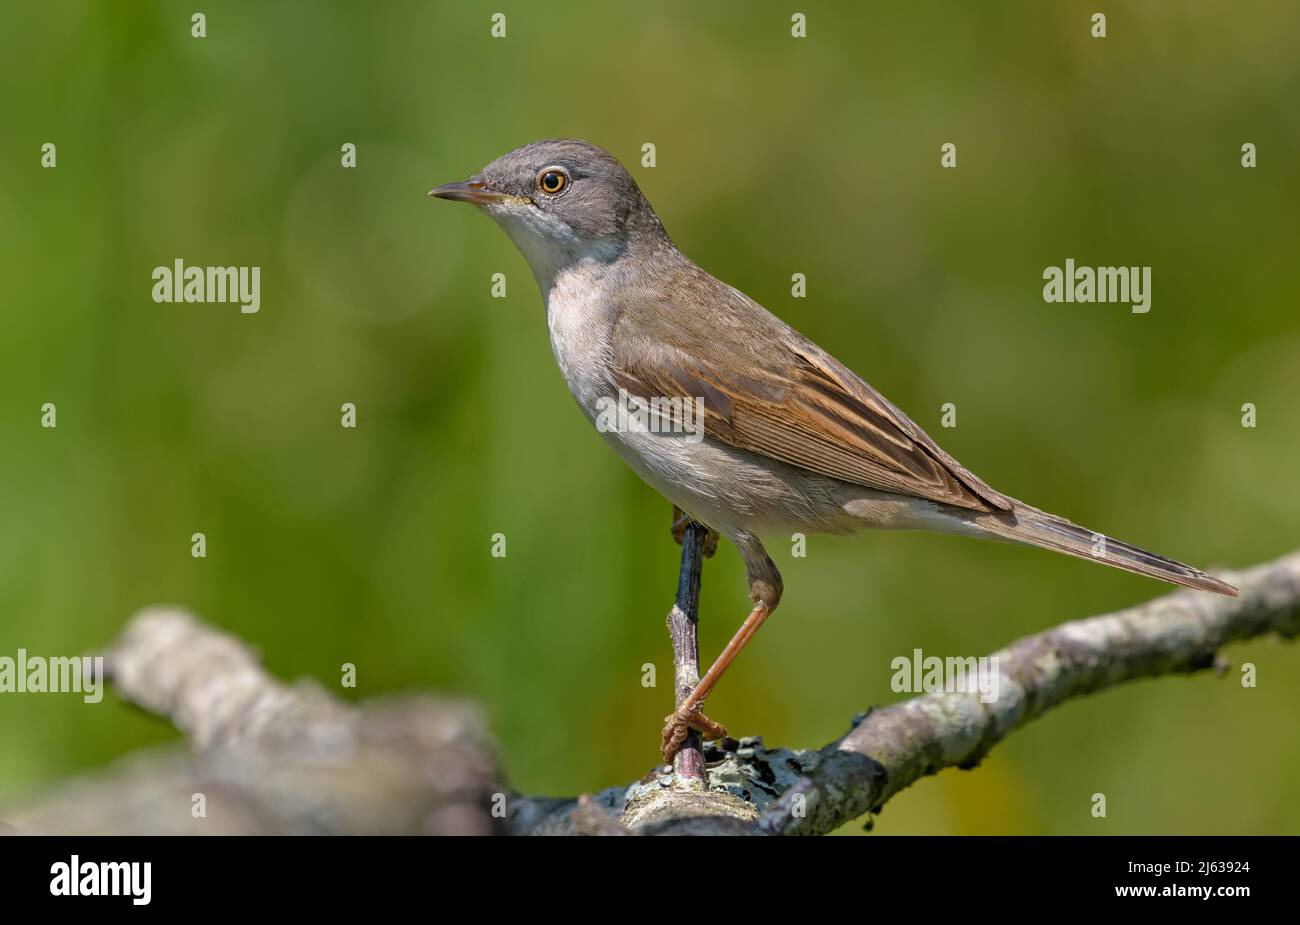 Common whitethroat (Curruca communis) posing on tiny branch with clear green background Stock Photo